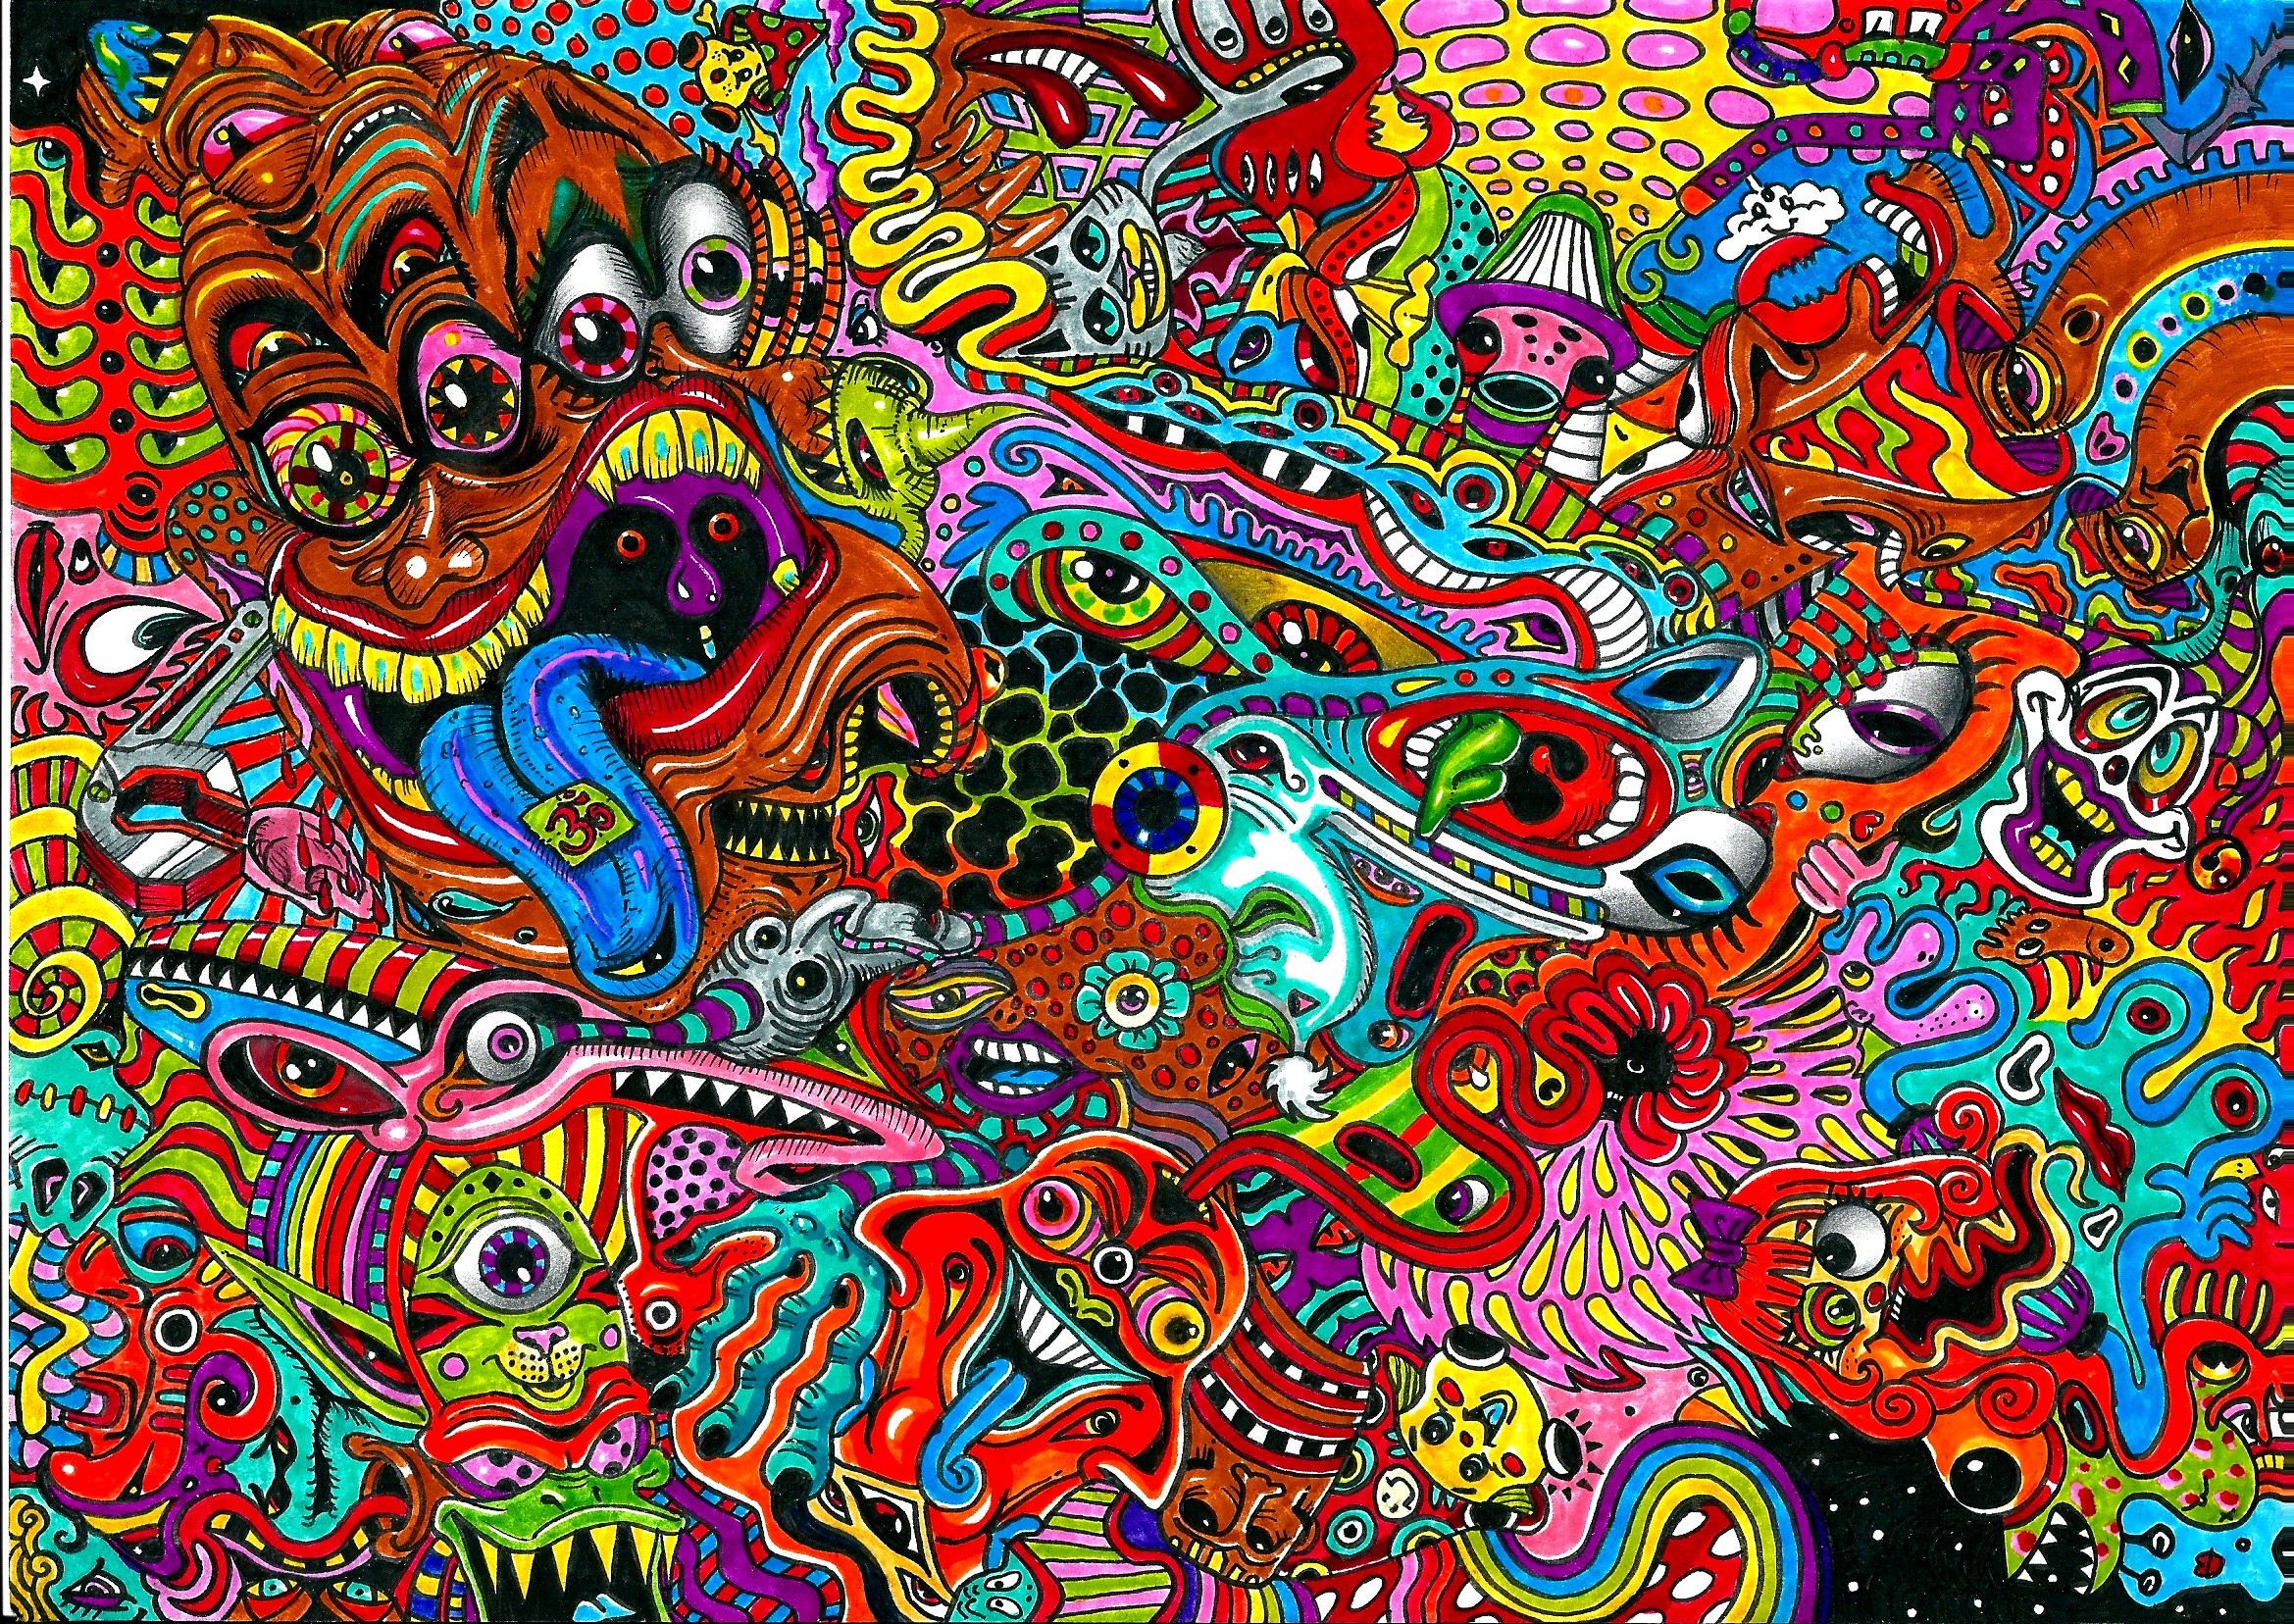 drawing, colorful, artistic, psychedelic, surreal